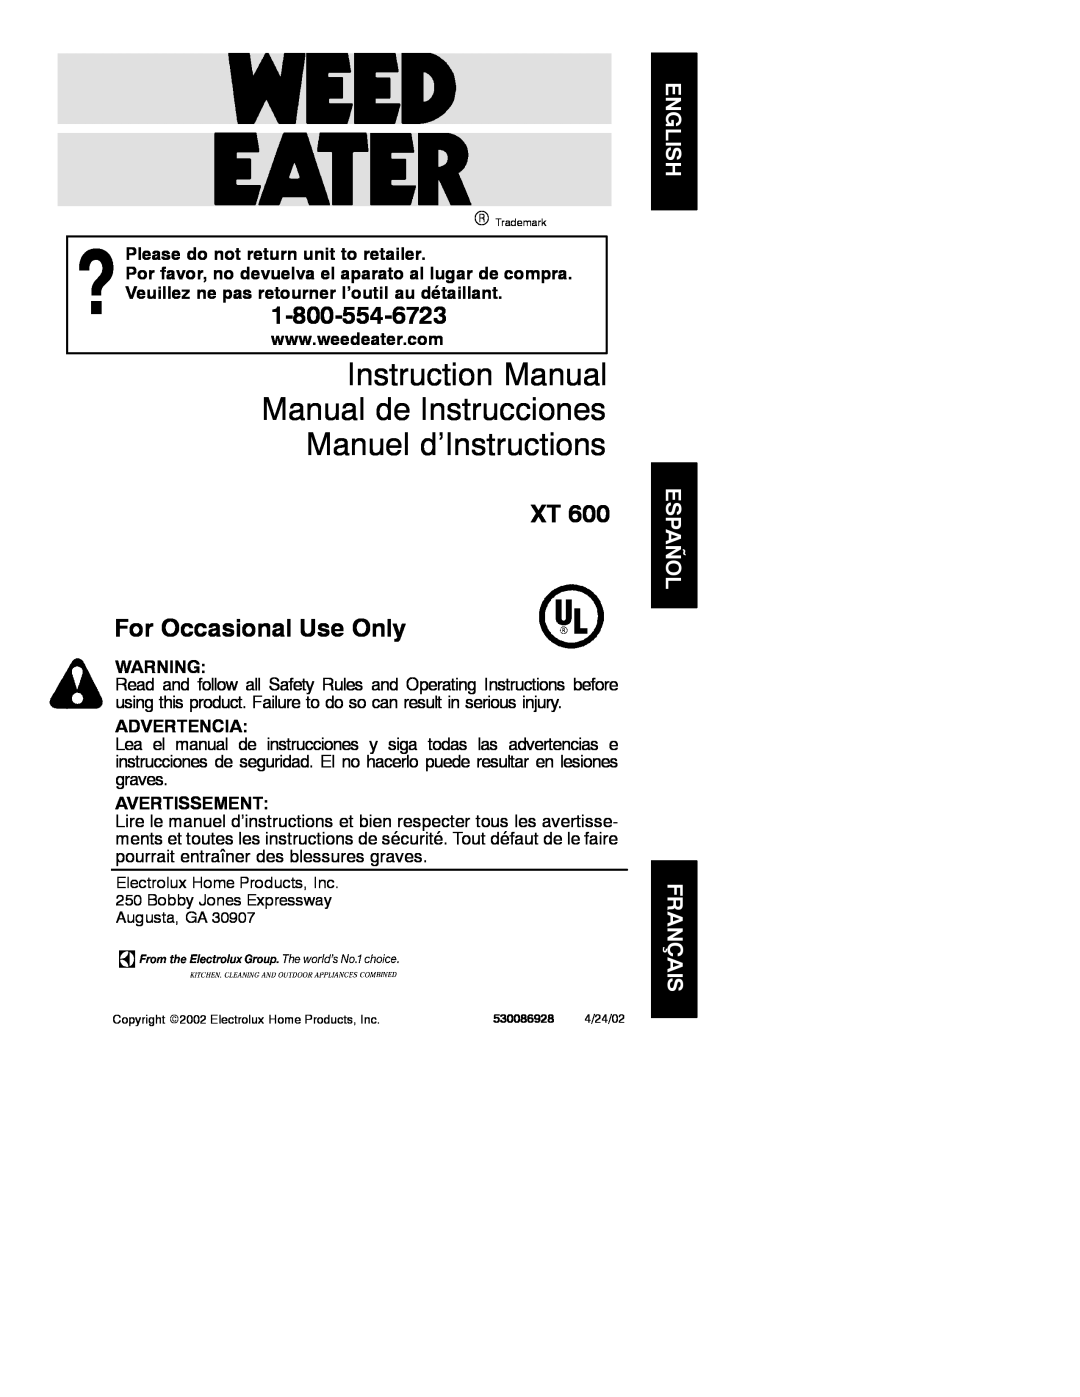 Weed Eater XT600 instruction manual Manuel d’Instructions, XT For Occasional Use Only, Advertencia, Avertissement 